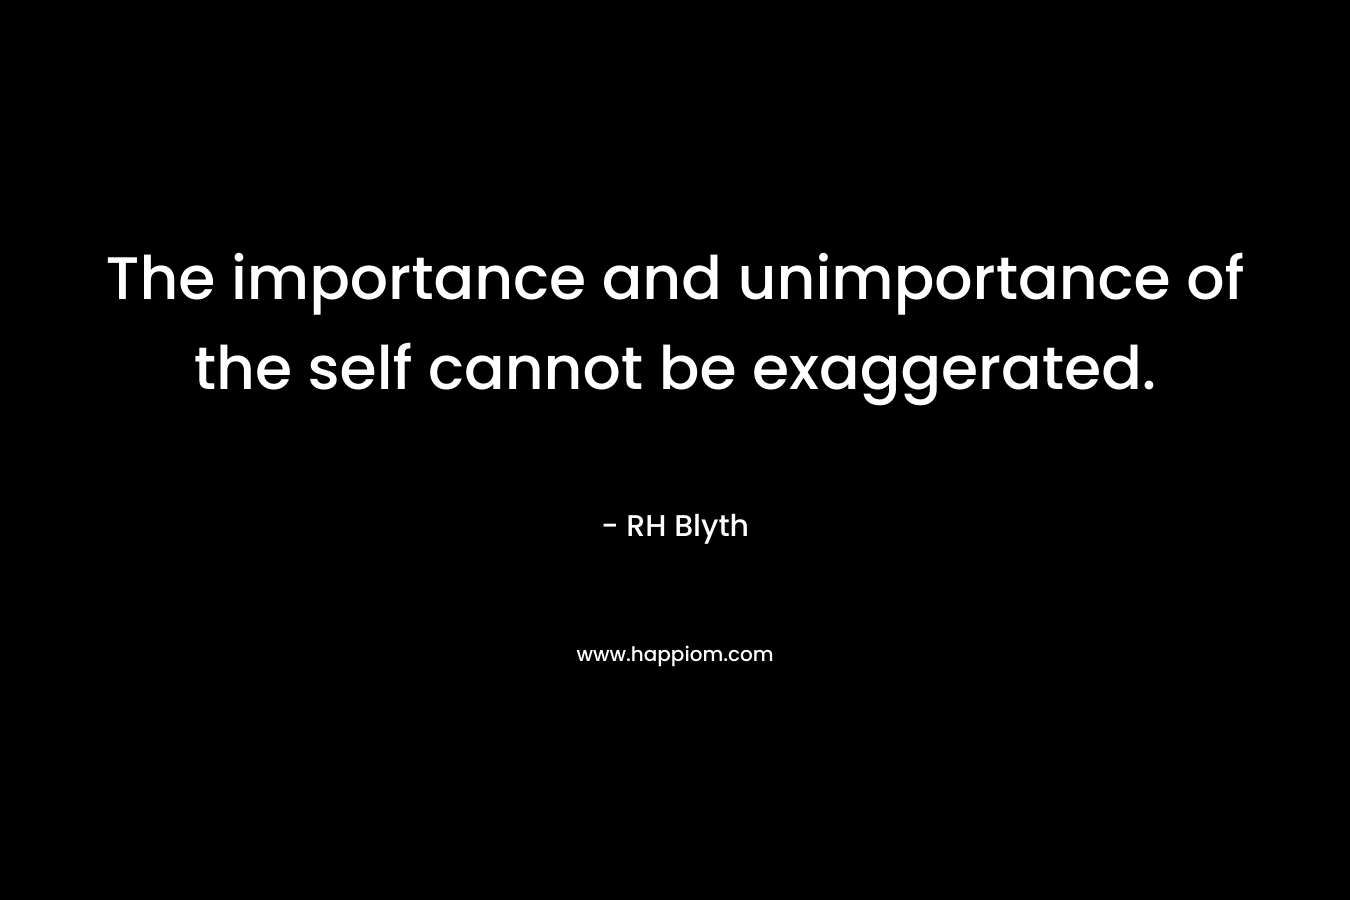 The importance and unimportance of the self cannot be exaggerated. – RH Blyth